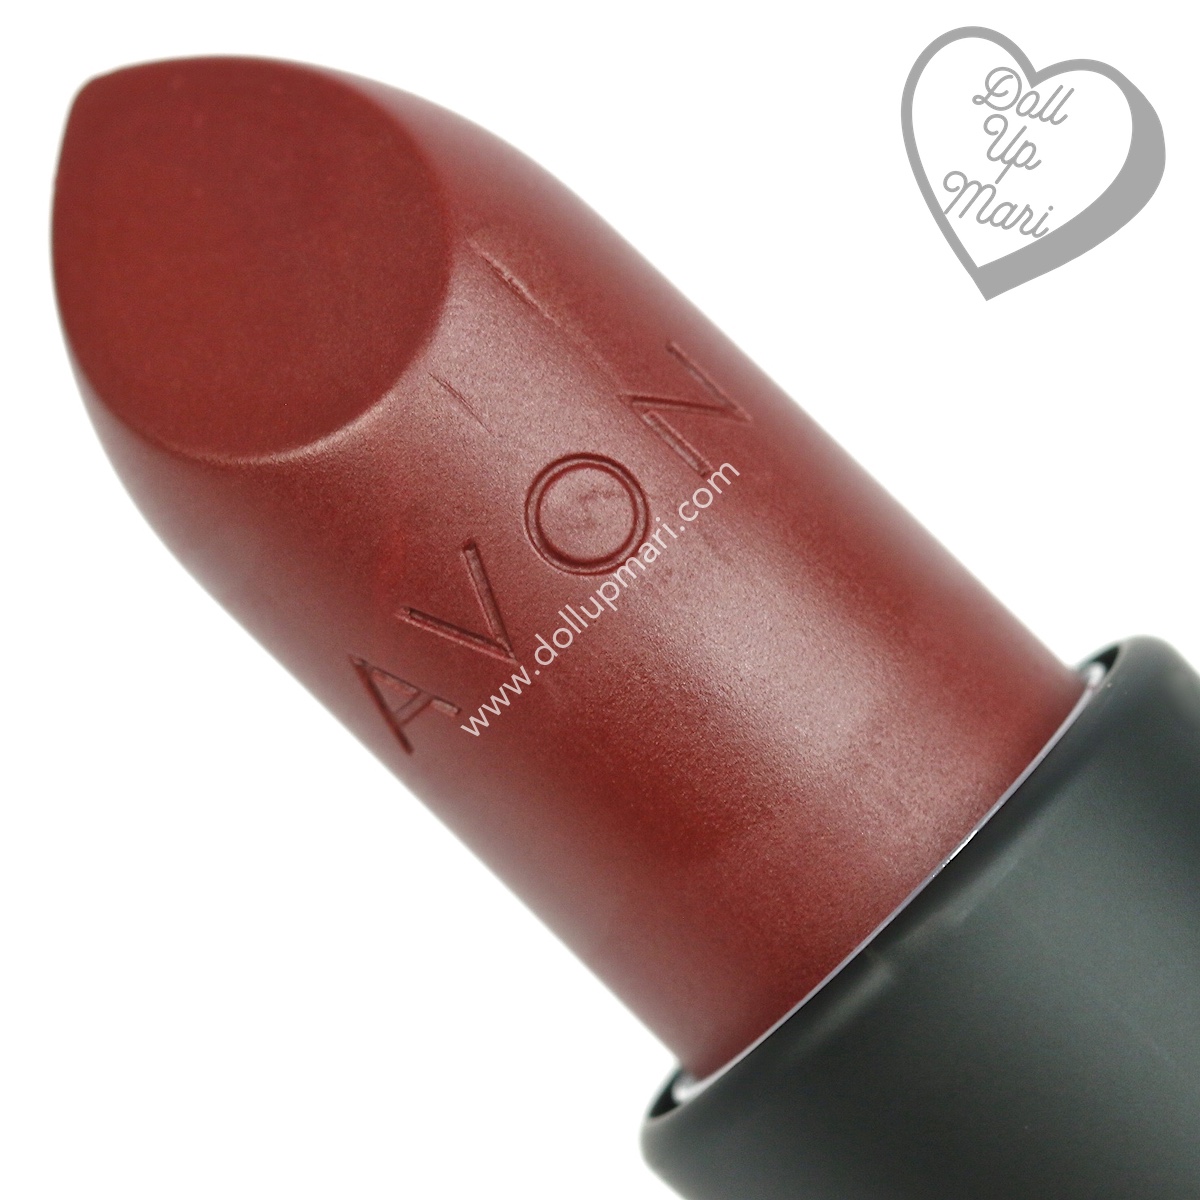 Zoom in of Superb Wine shade of AVON Perfectly Matte Lipstick 